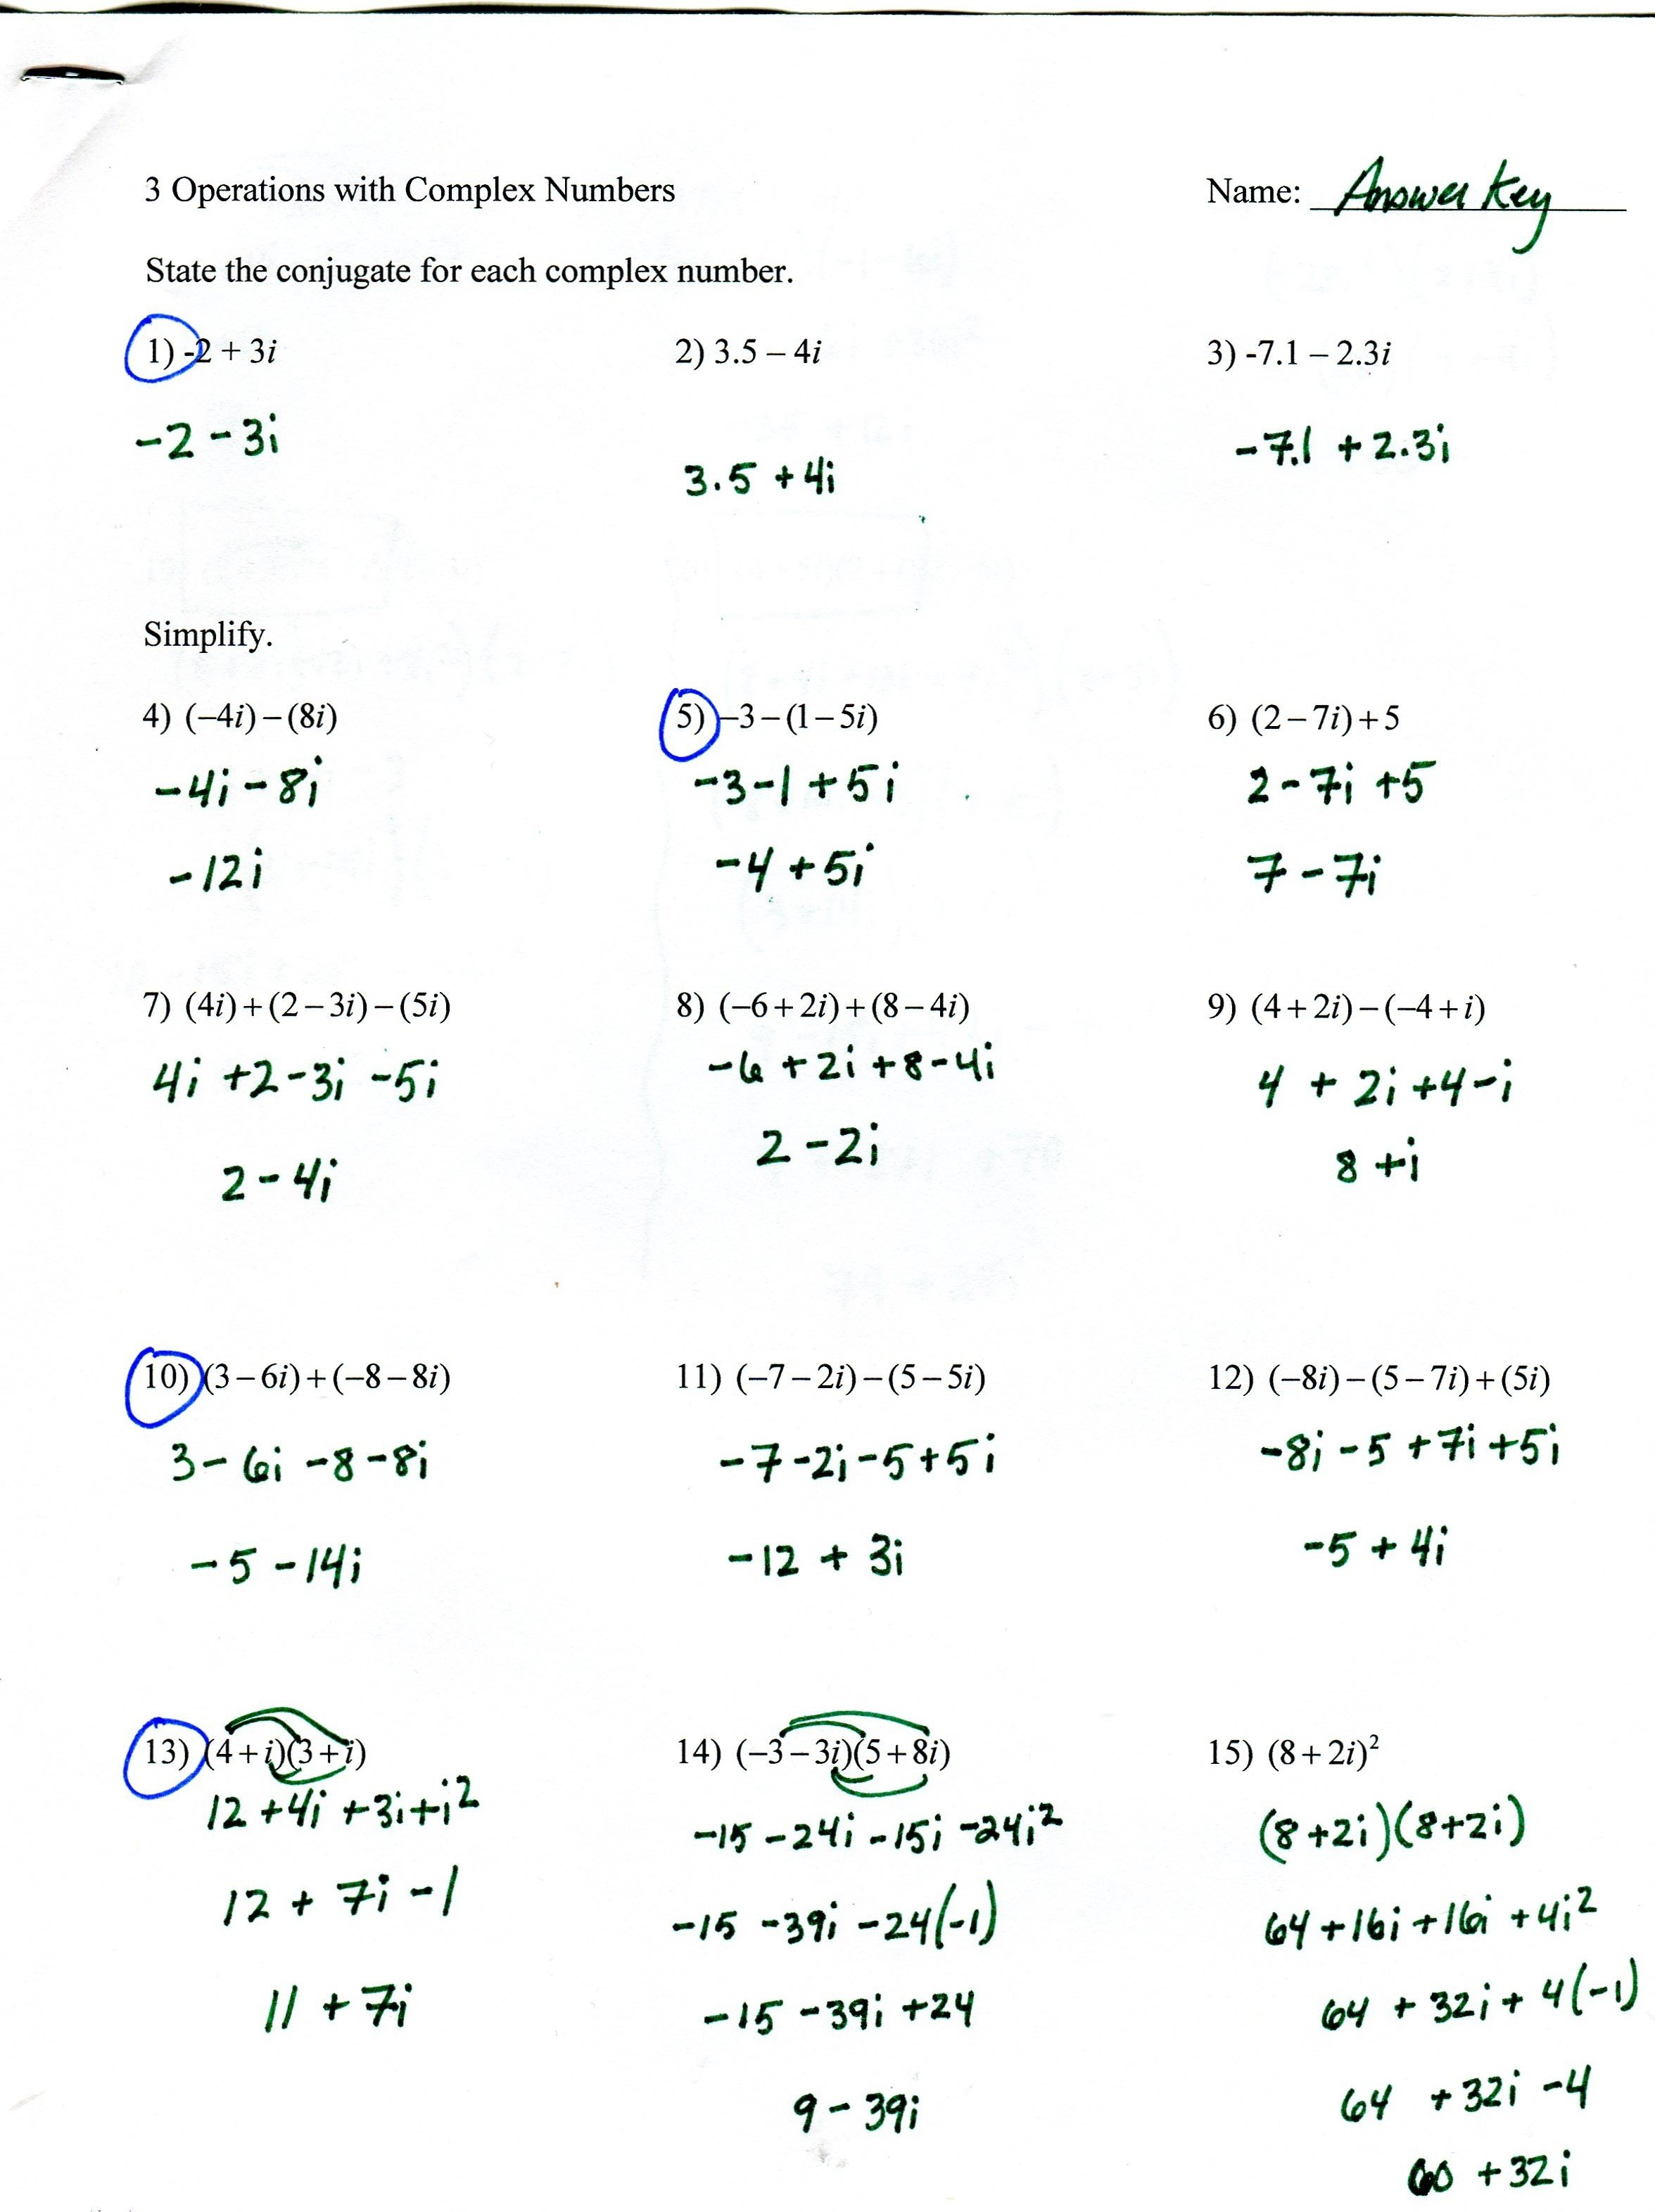 Extended Algebra 1 Functions Worksheet 4 Answers Best Of Algebra With Extended Algebra 1 Functions Worksheet 4 Answers